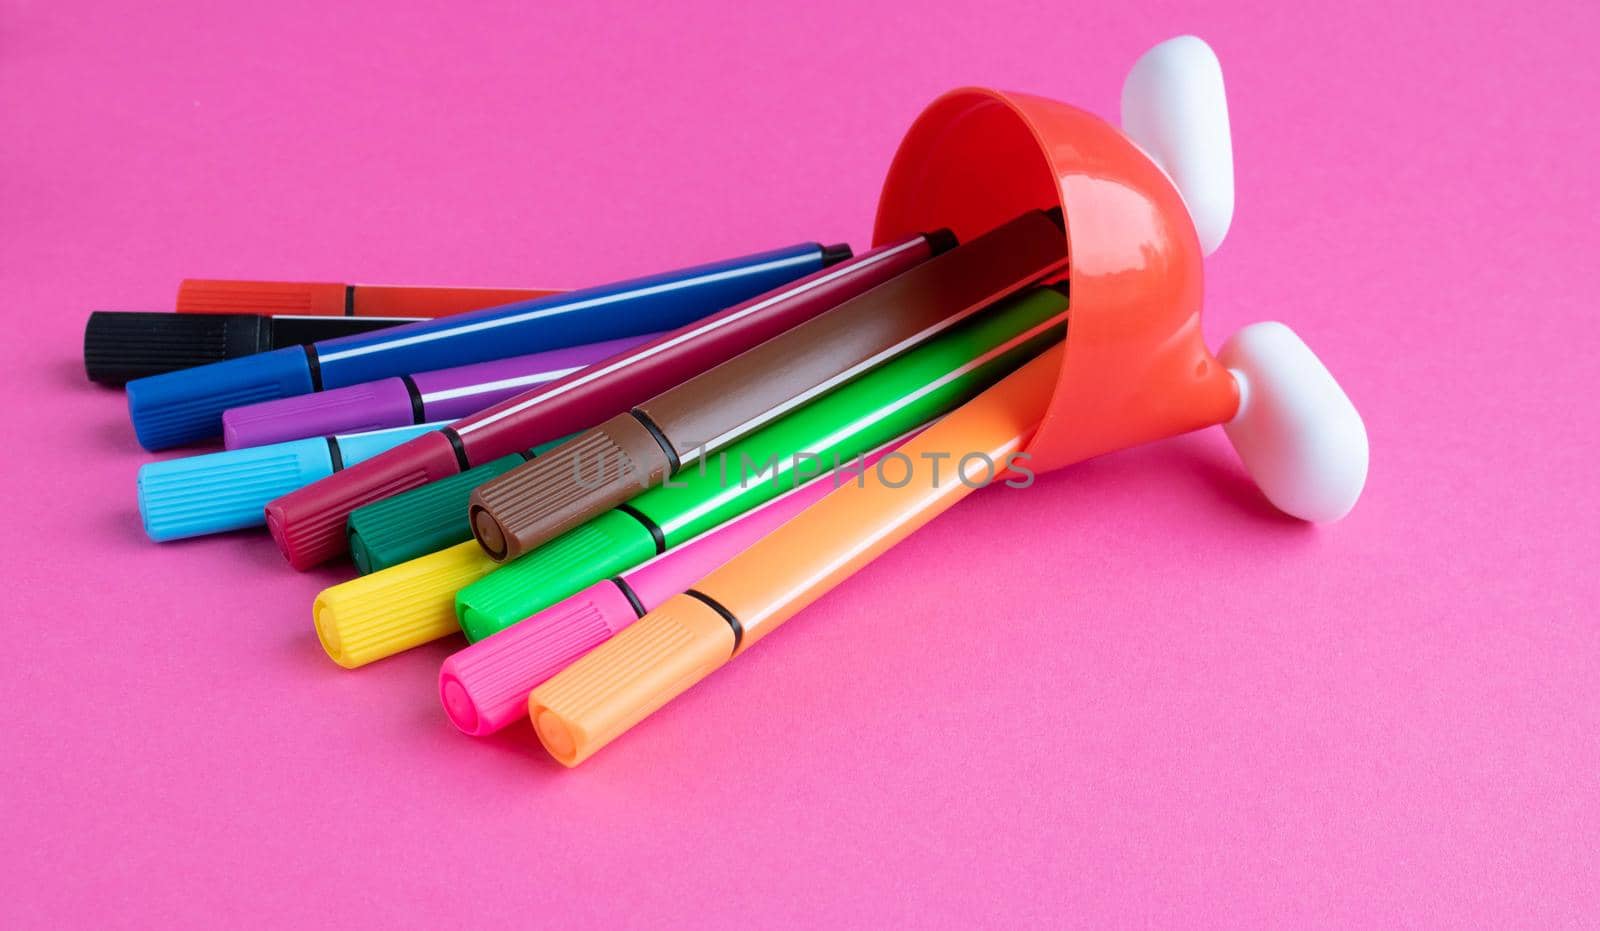 Fallen colored markers and a red stand with white legs isolated on a pink background